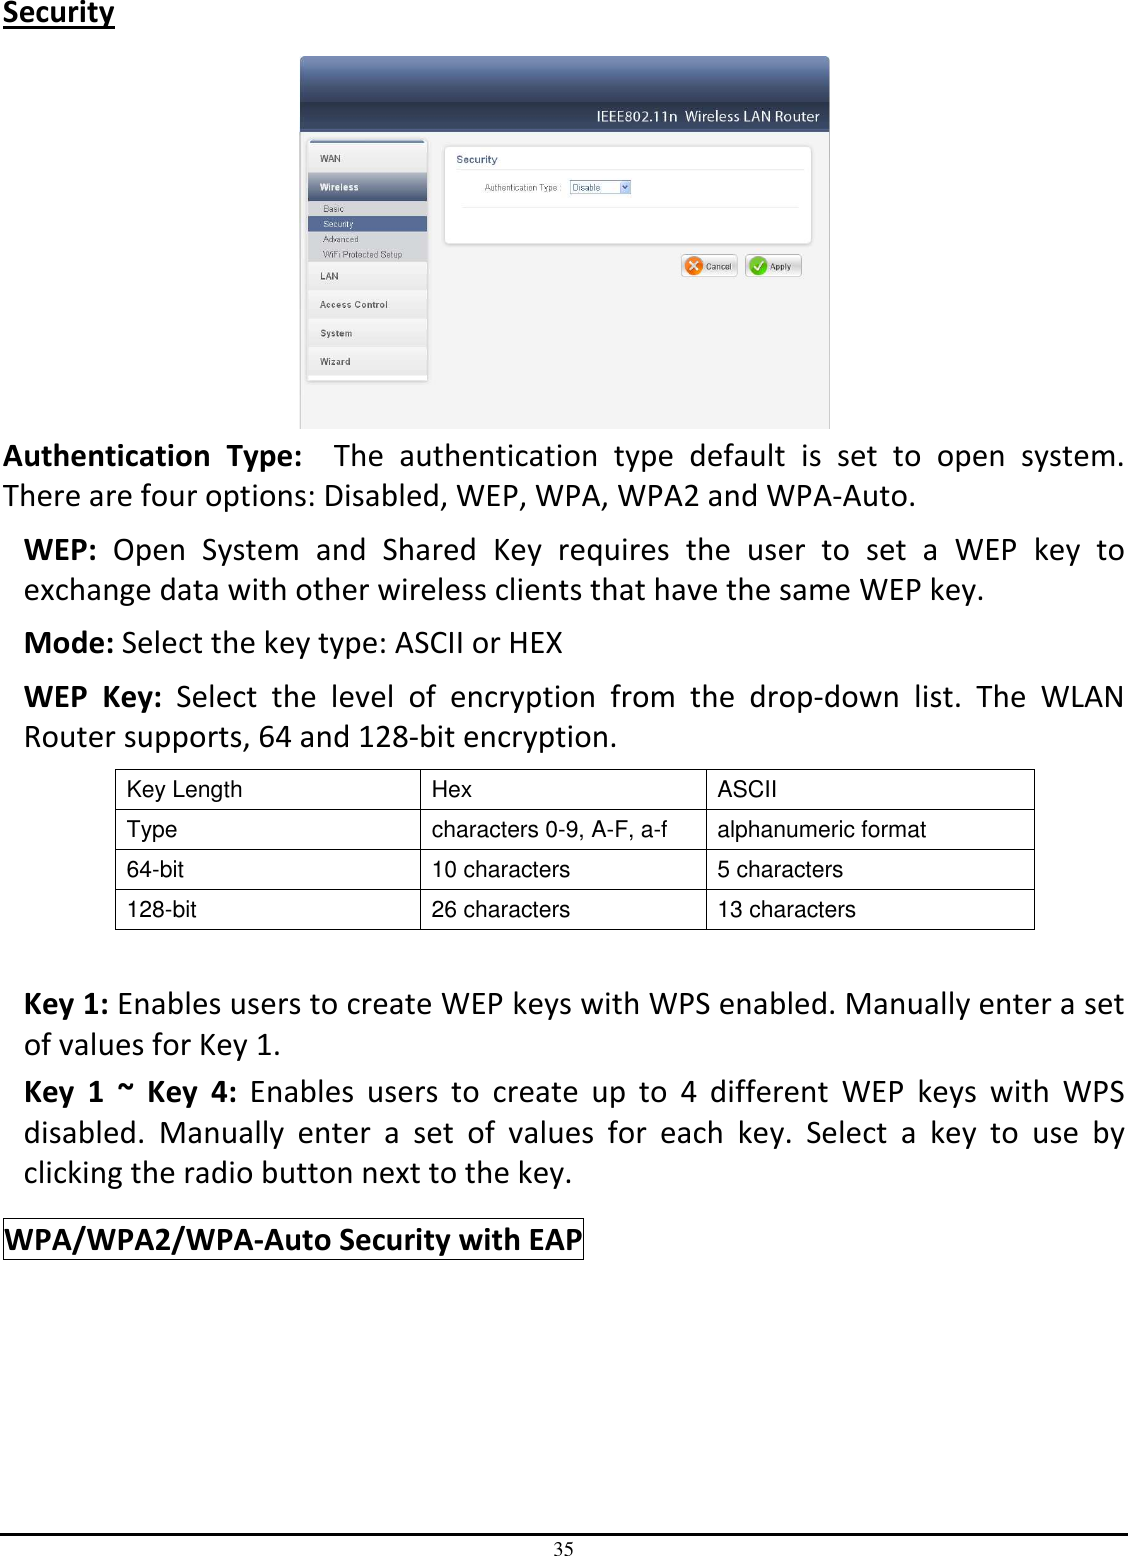 35 Security   Authentication  Type:    The  authentication  type  default  is  set  to  open  system.  There are four options: Disabled, WEP, WPA, WPA2 and WPA-Auto. WEP:  Open  System  and  Shared  Key  requires  the  user  to  set  a  WEP  key  to exchange data with other wireless clients that have the same WEP key. Mode: Select the key type: ASCII or HEX WEP  Key:  Select  the  level  of  encryption  from  the  drop-down  list.  The  WLAN Router supports, 64 and 128-bit encryption. Key Length  Hex  ASCII Type  characters 0-9, A-F, a-f  alphanumeric format 64-bit  10 characters  5 characters 128-bit  26 characters  13 characters  Key 1: Enables users to create WEP keys with WPS enabled. Manually enter a set of values for Key 1.  Key  1  ~  Key  4:  Enables  users  to  create  up  to  4  different  WEP  keys  with  WPS disabled.  Manually  enter  a  set  of  values  for  each  key.  Select  a  key  to  use  by clicking the radio button next to the key. WPA/WPA2/WPA-Auto Security with EAP 